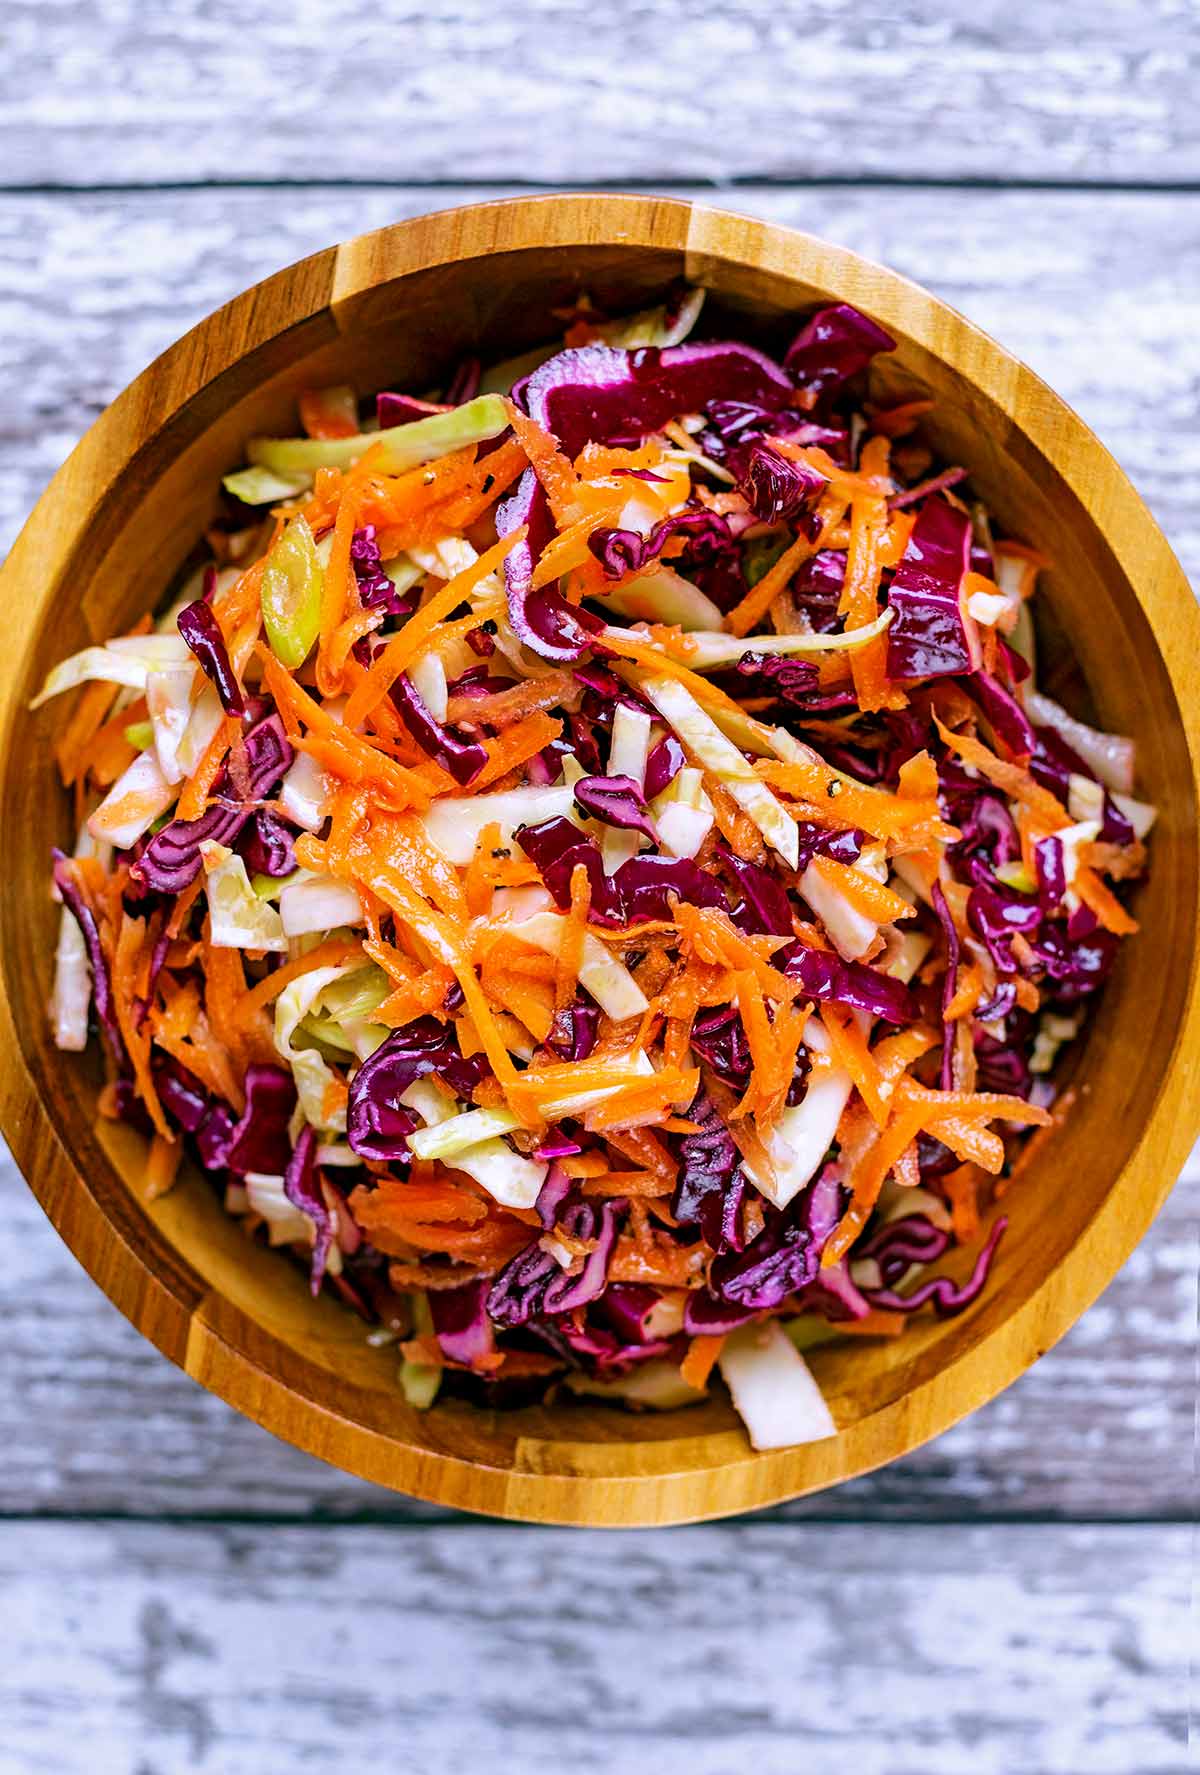 A wooden bowl containing slaw.